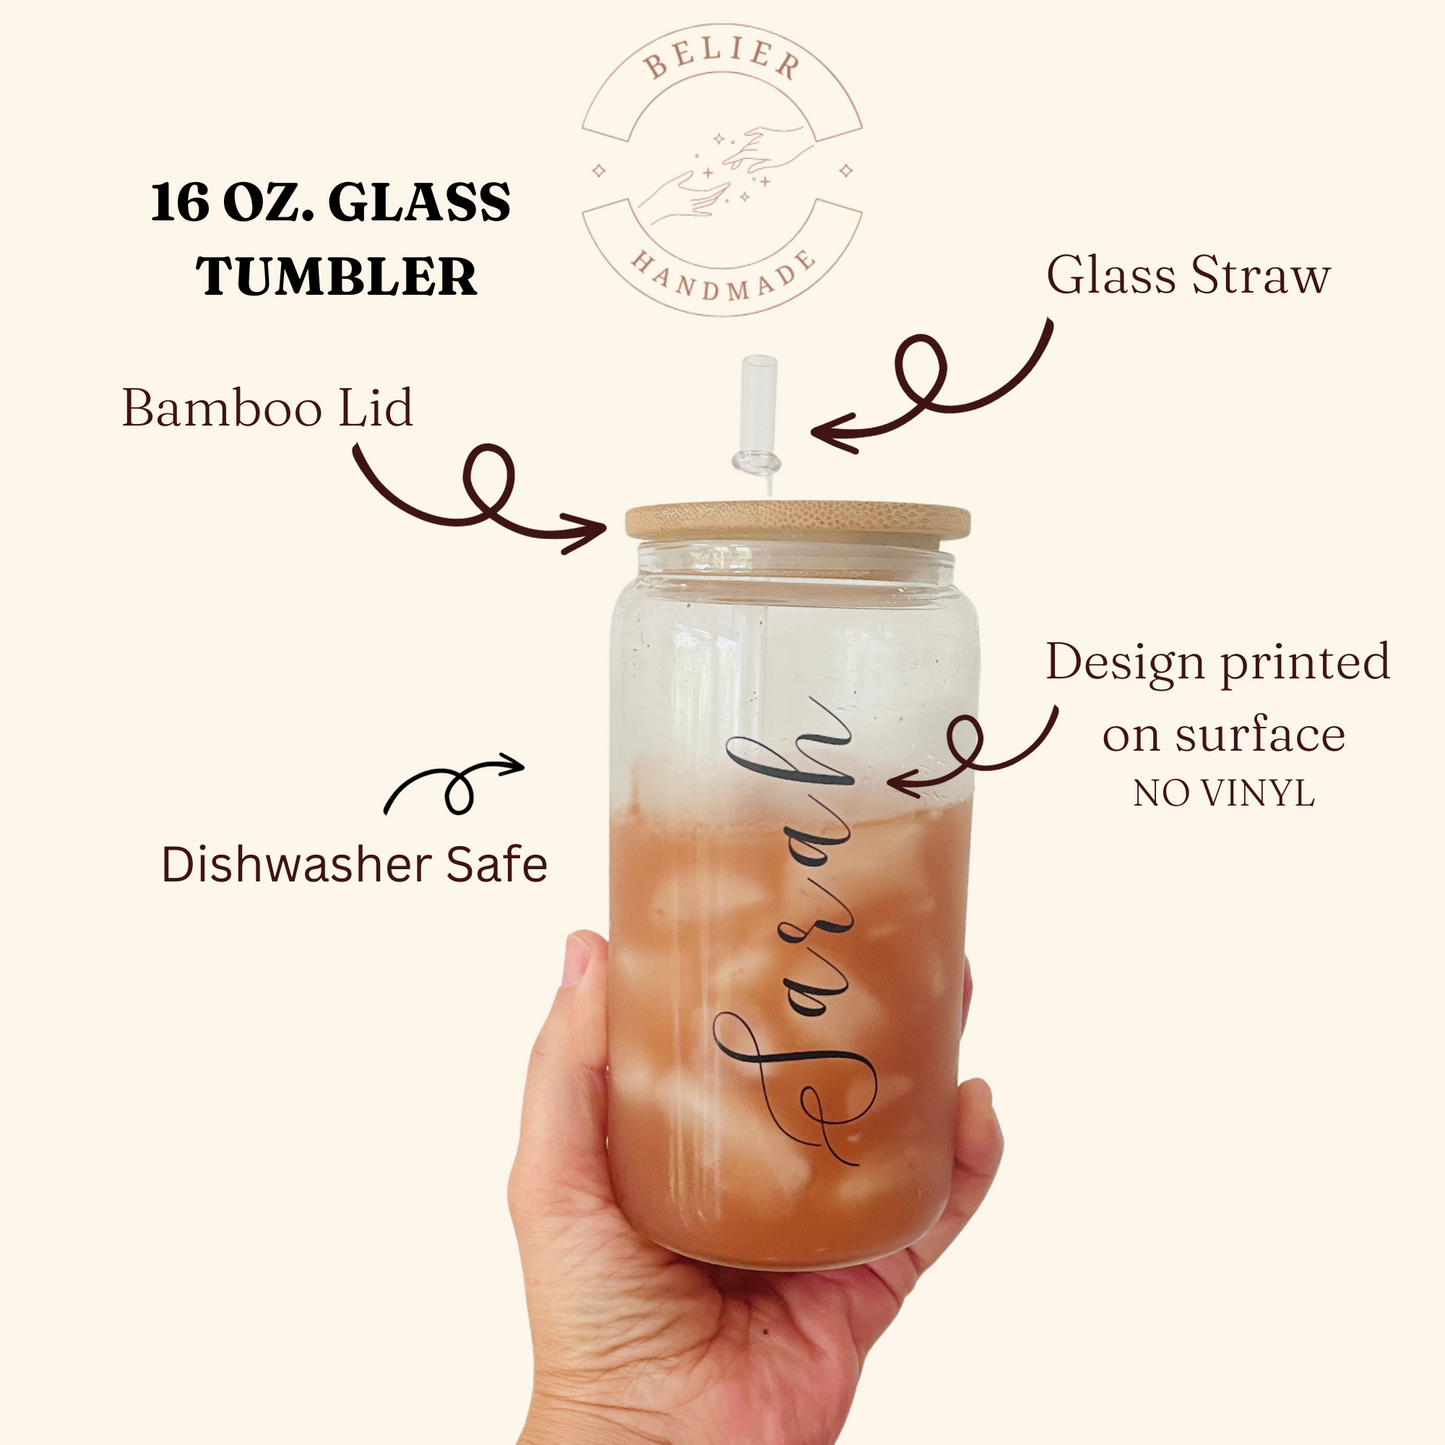 Personalized Glass Tumbler with Birth Month Flower